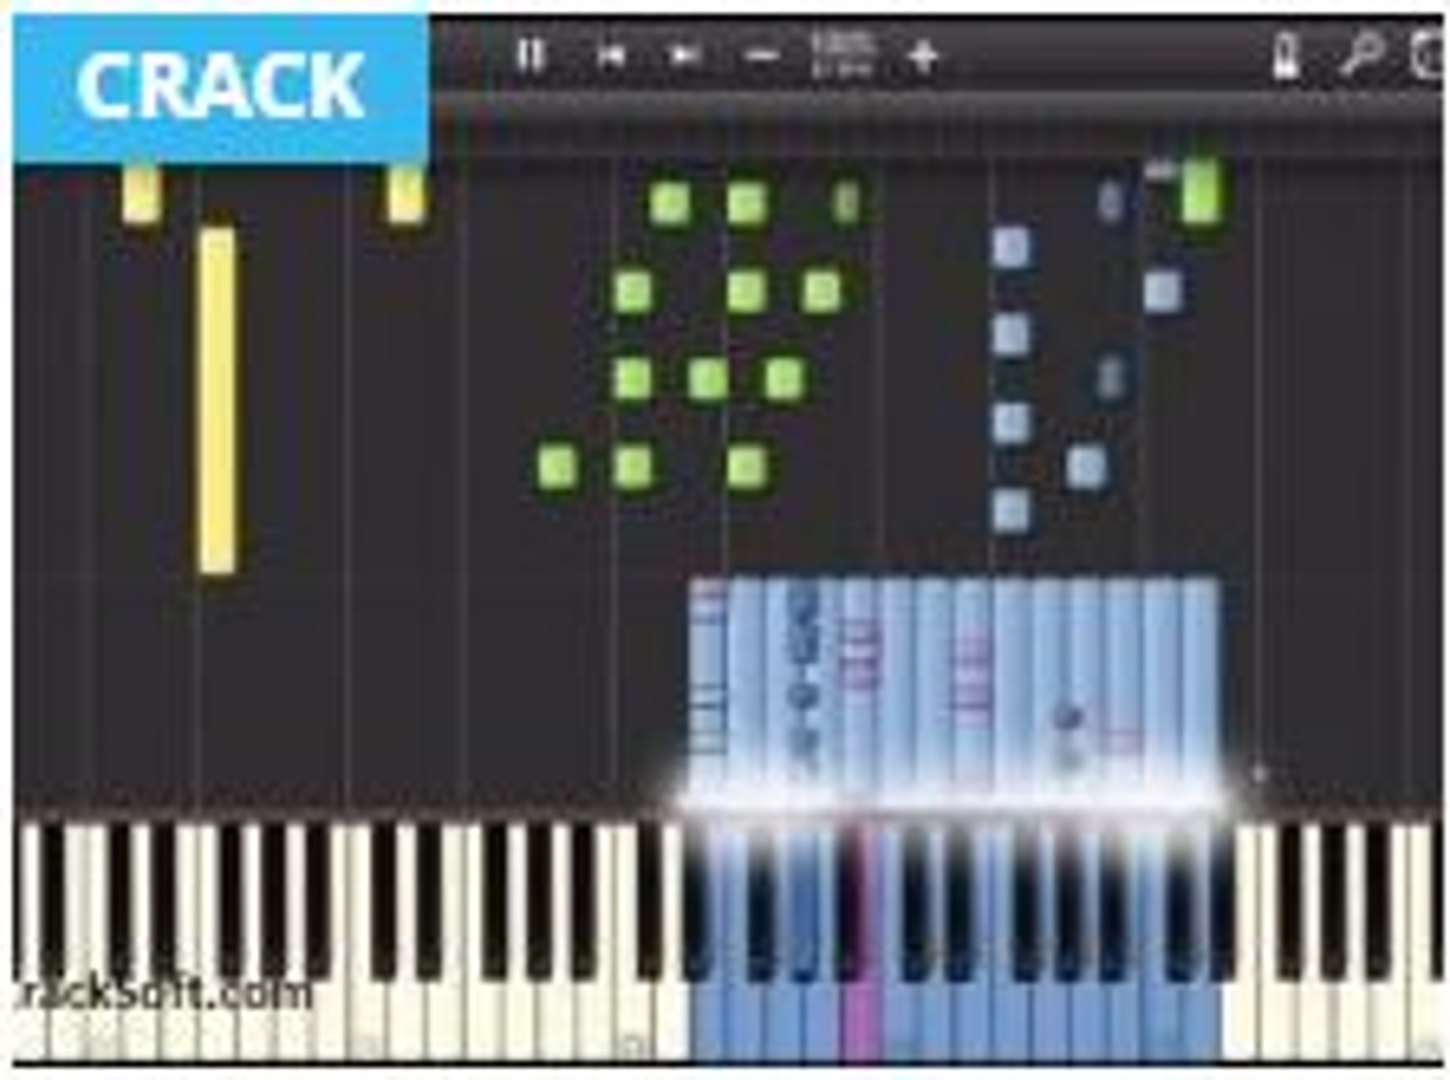 synthesia keyboards